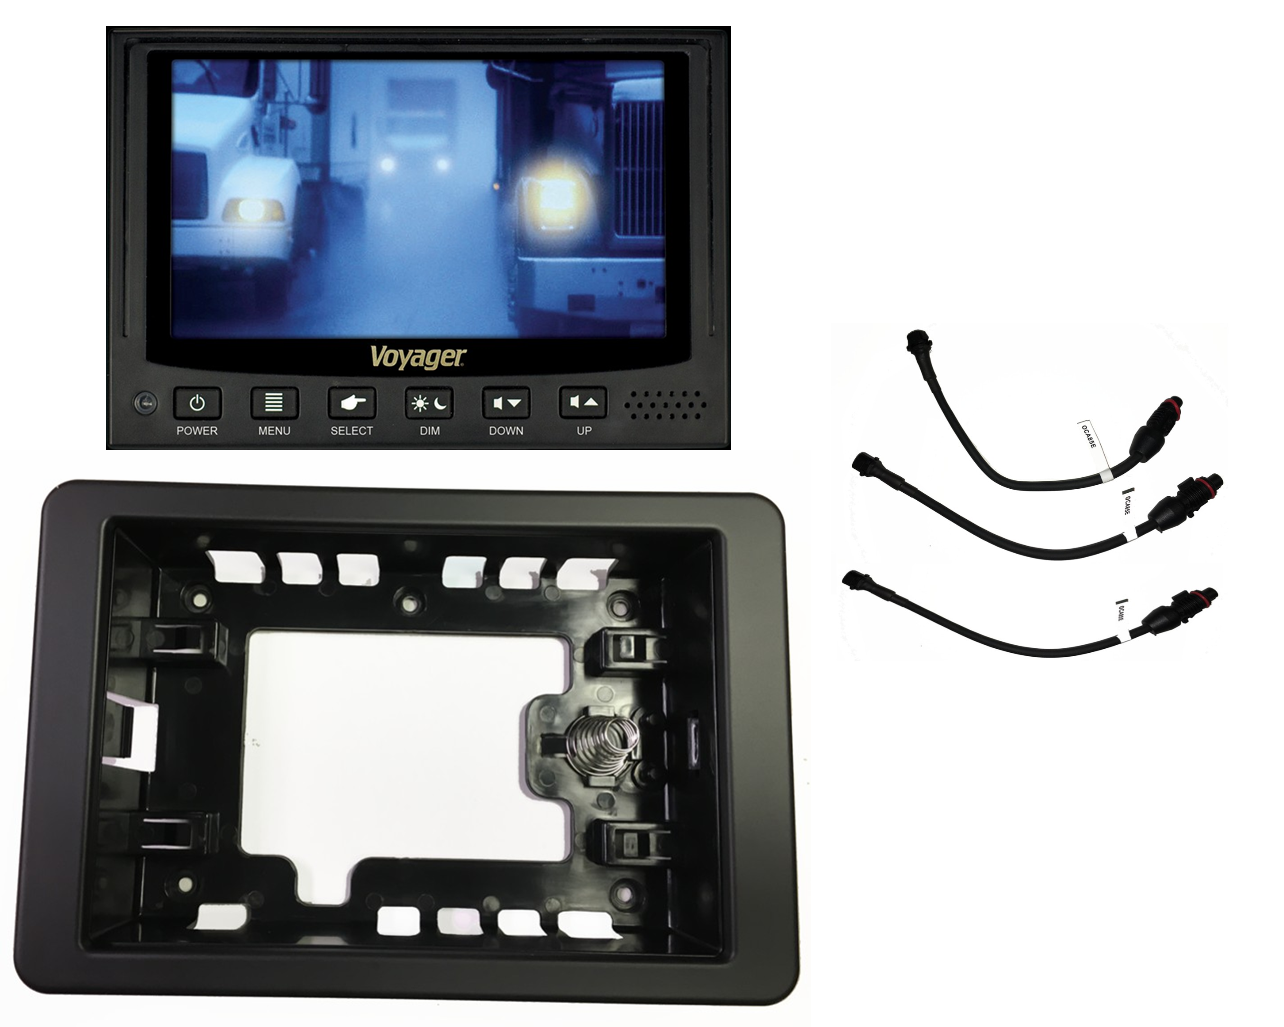 VOM784CT-kit -- A Kit to Install Heavy-Duty Voyager 7" Color Quad-View monitor in place of VOM784CT.